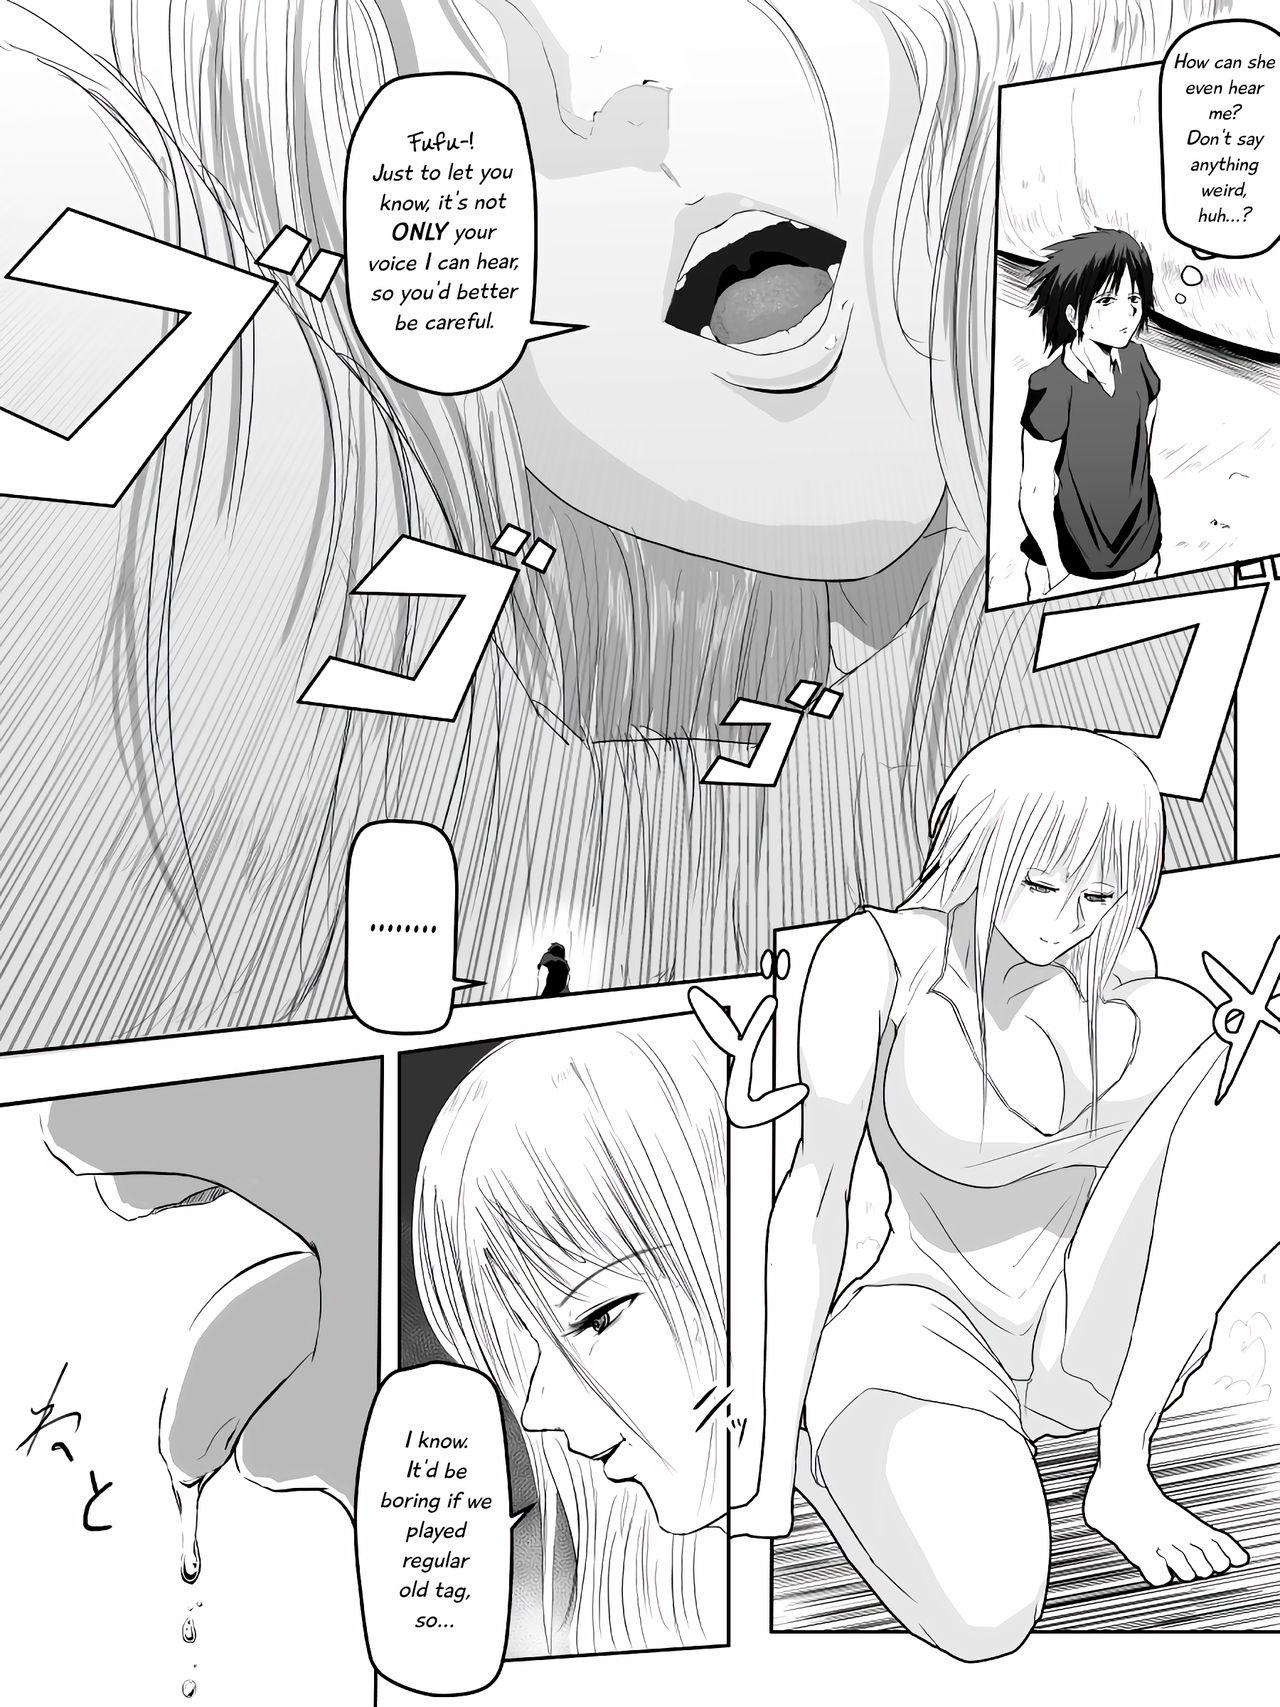 Playing With Onee-san: A Story 4